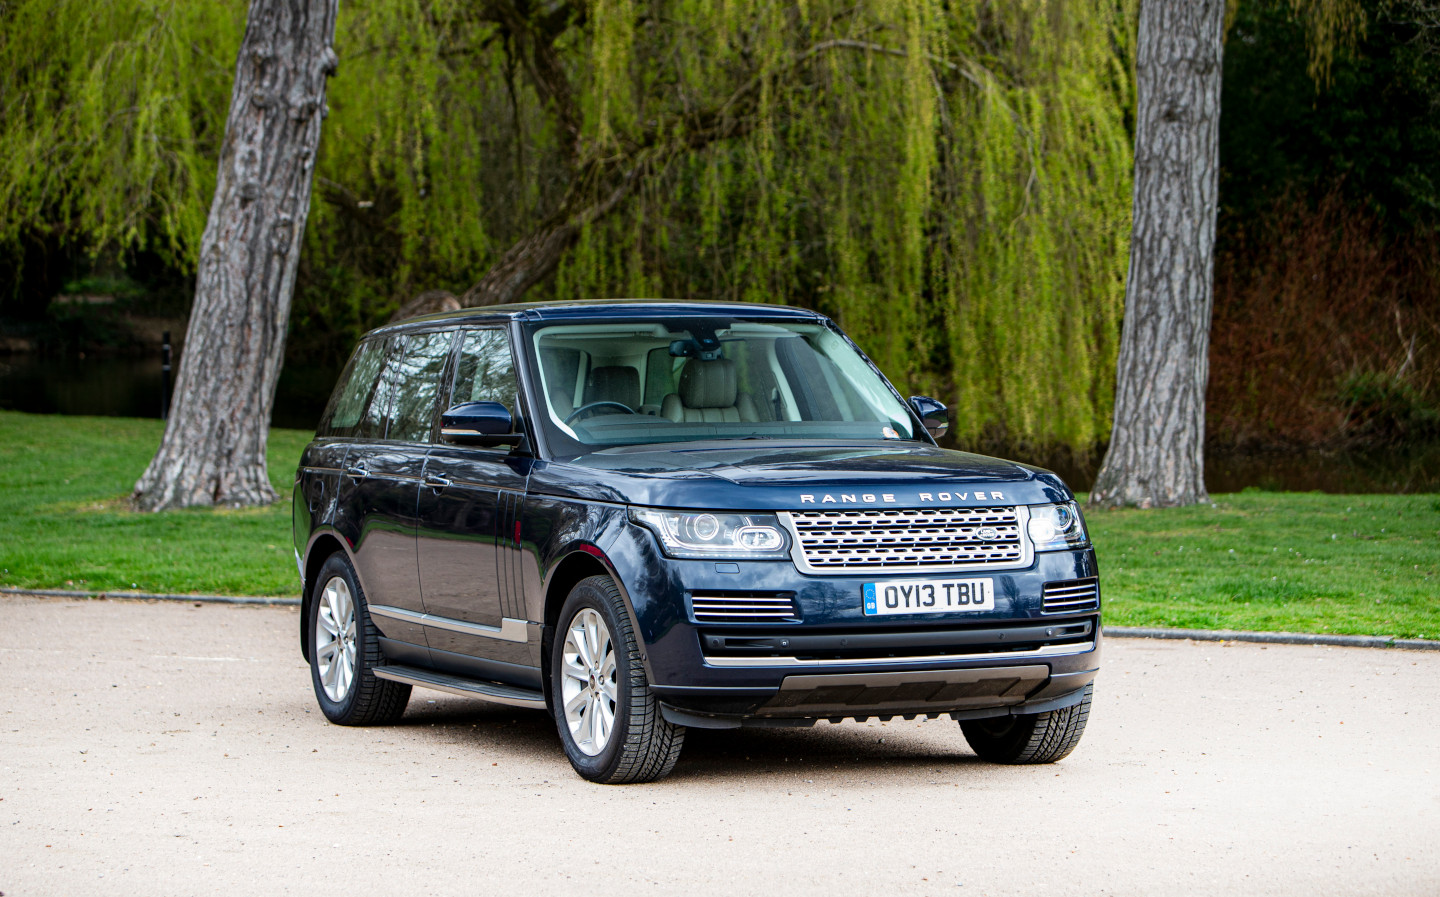 Prince William and Kate Middleton's royal Range Rover up for sale